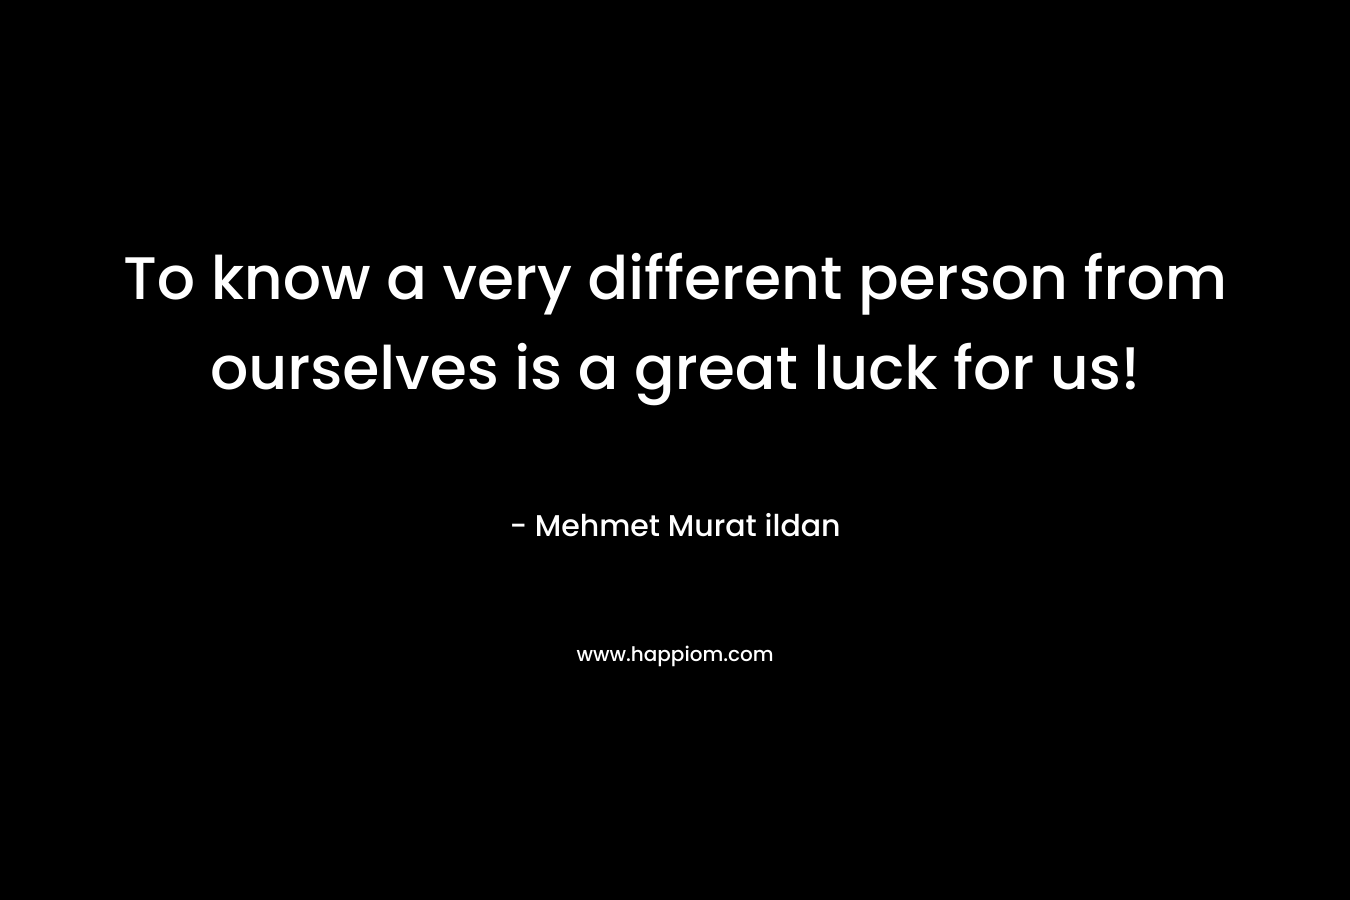 To know a very different person from ourselves is a great luck for us! – Mehmet Murat ildan